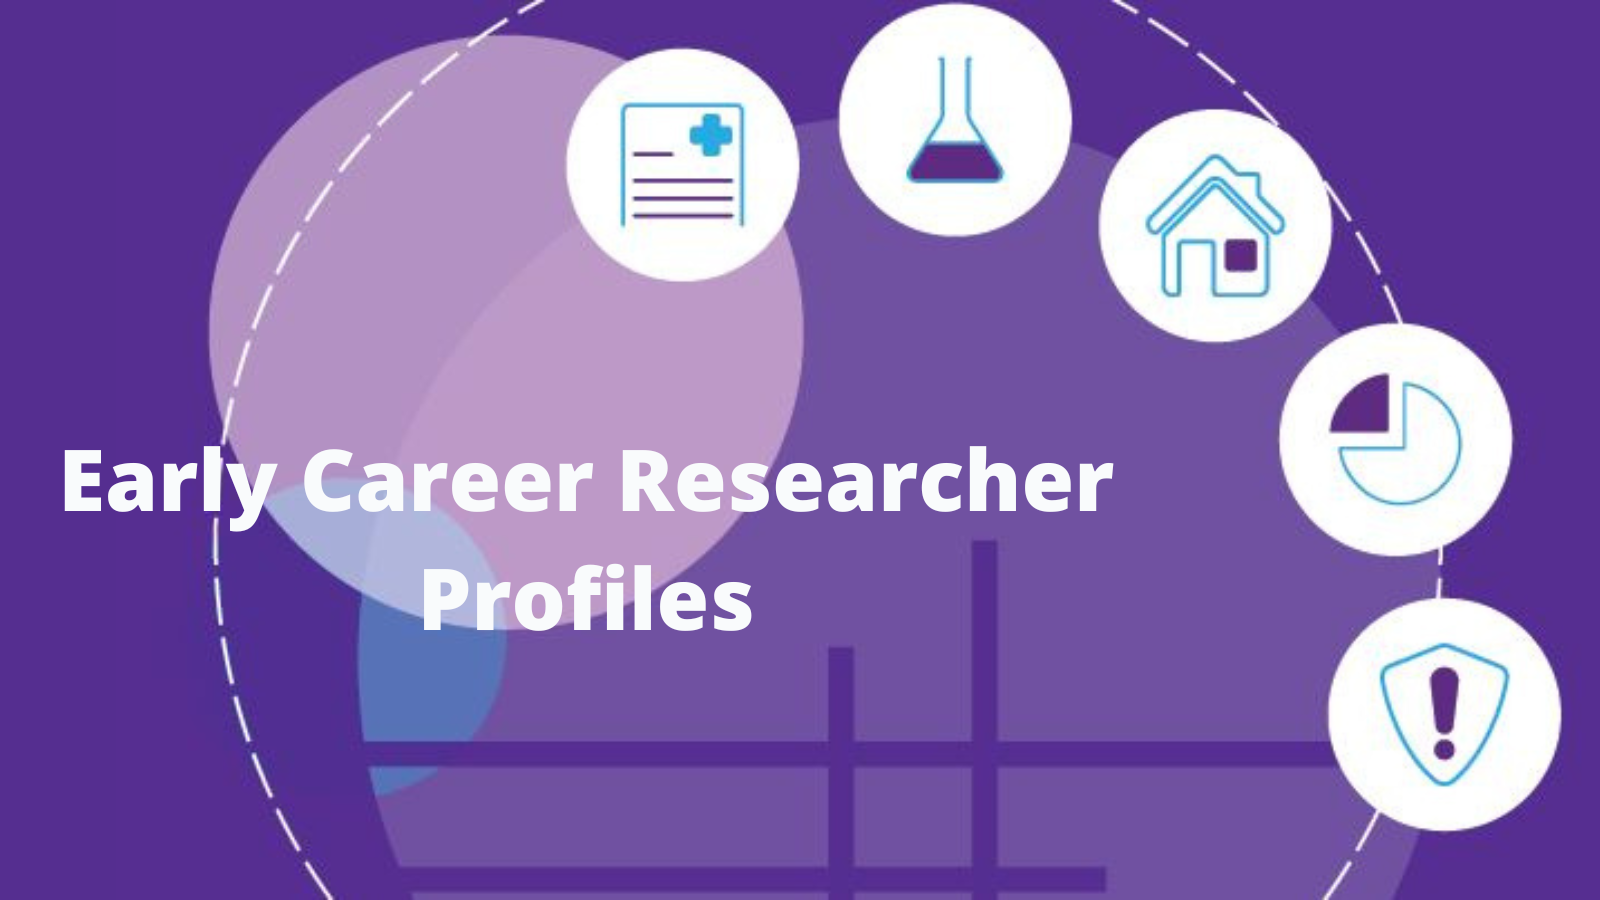 Early Career Researcher Profiles